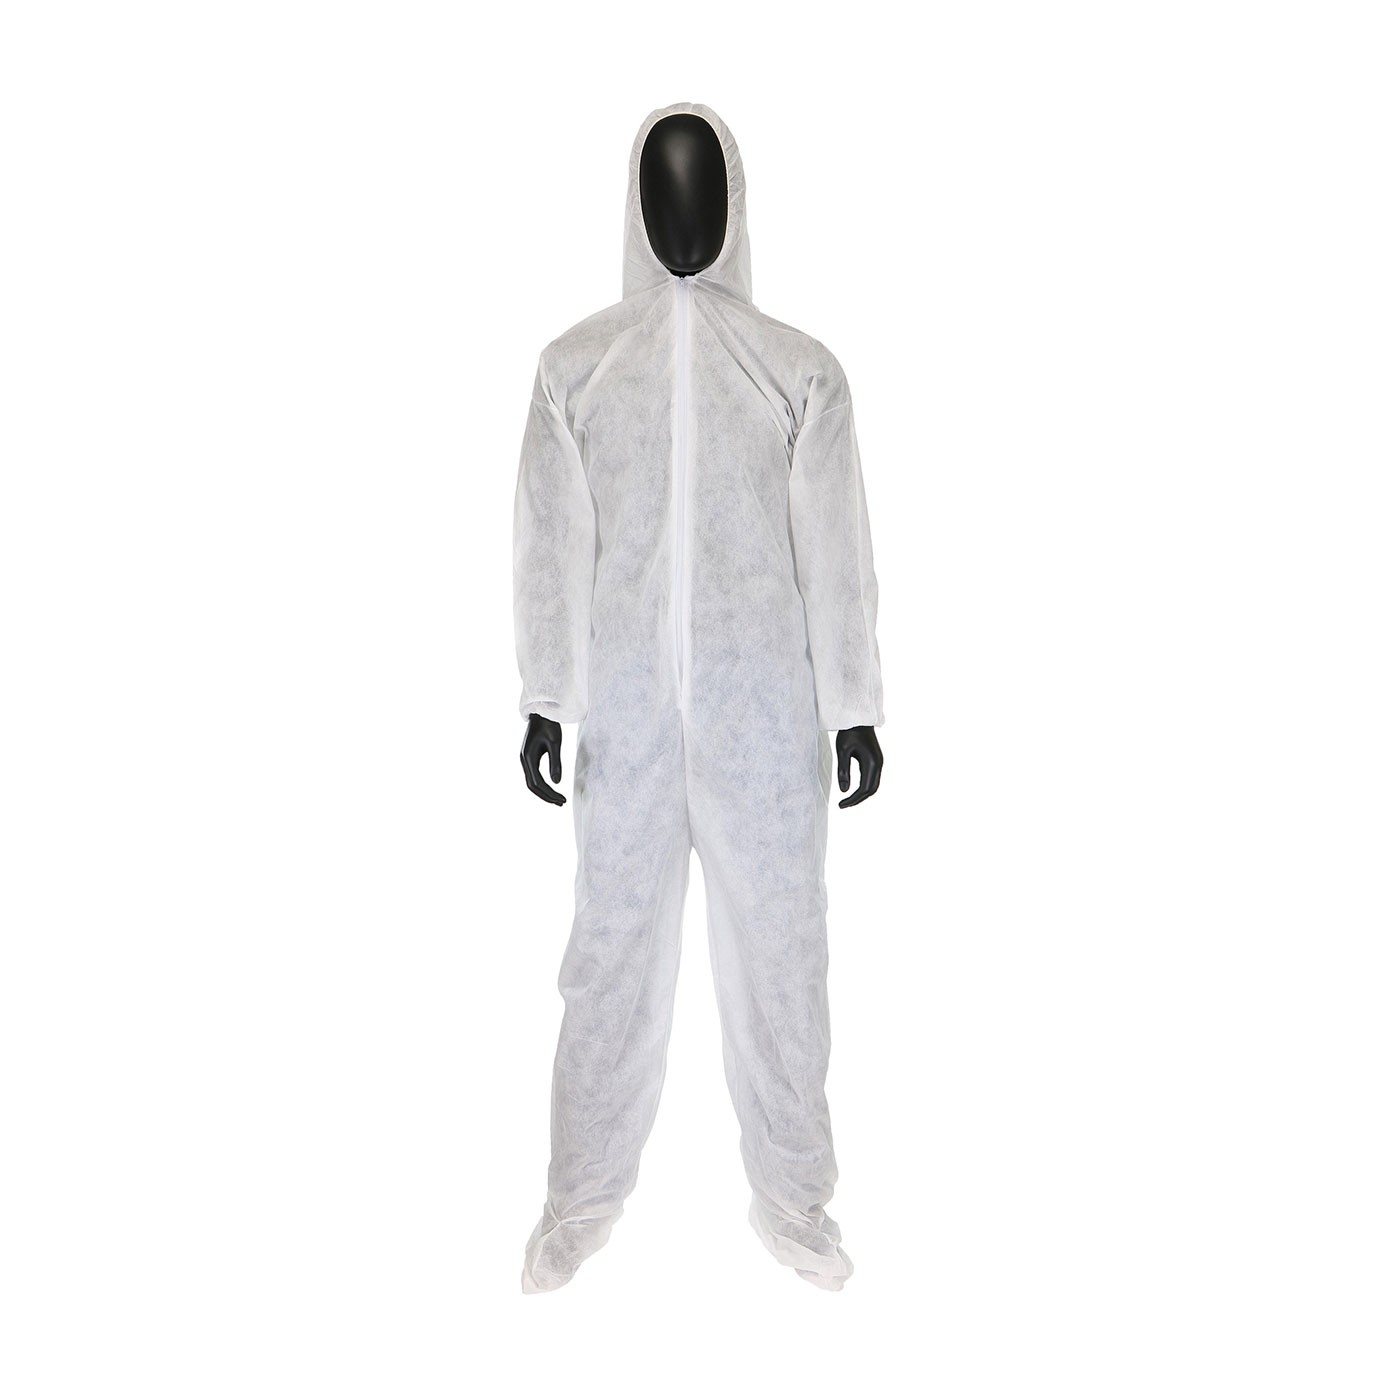  West Chester® SMS Coverall with Hood & Boot  (#C3859)